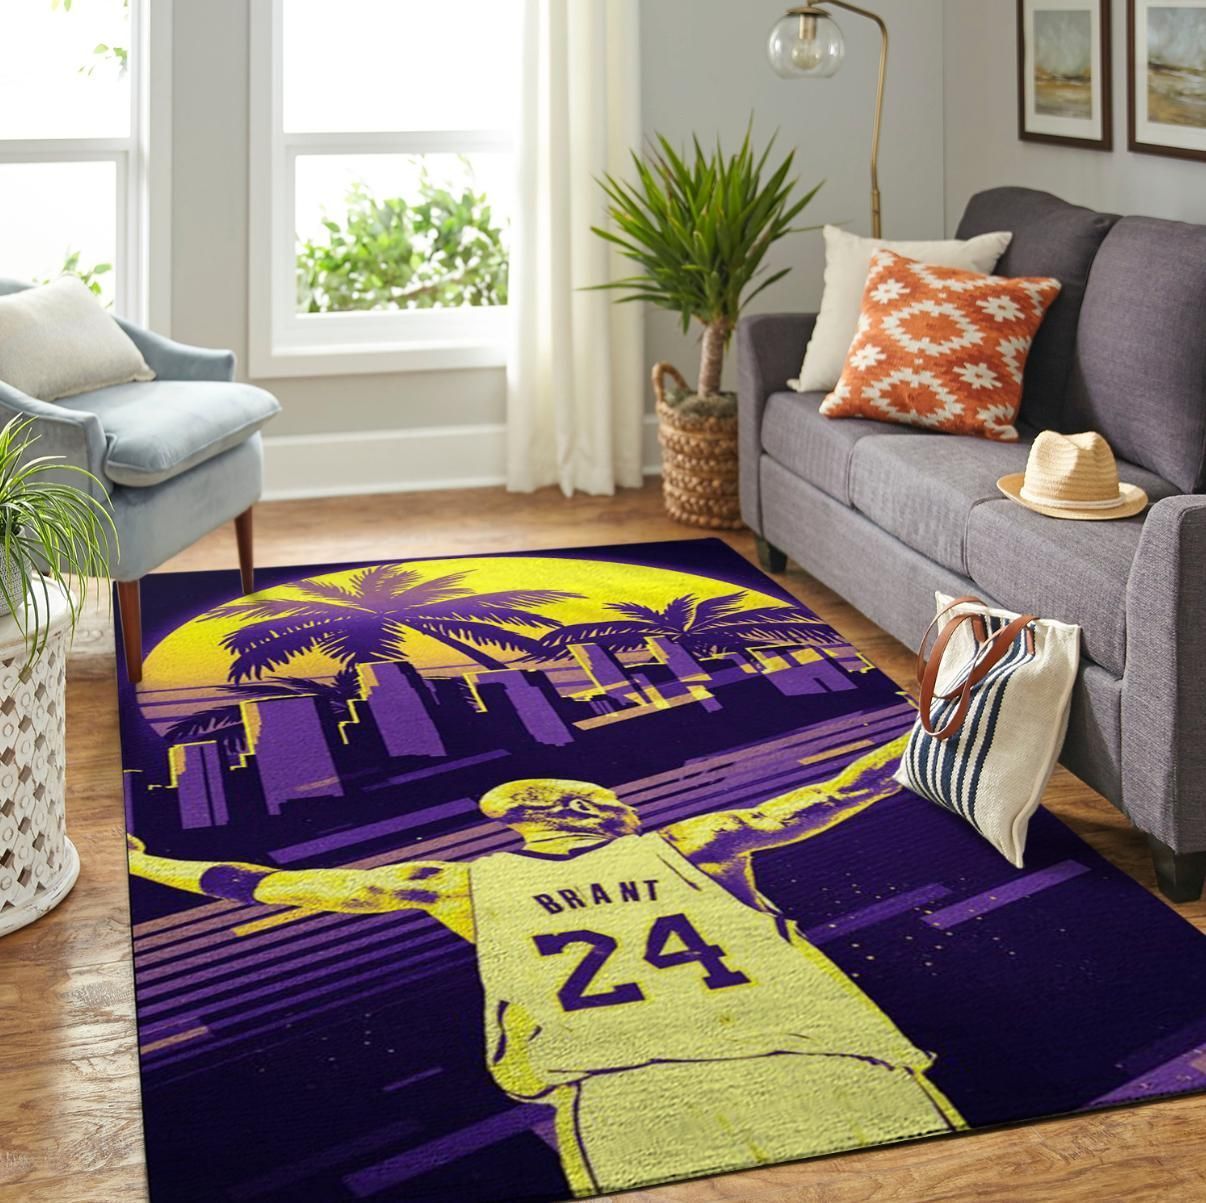 Kobe Bryant Legend 24 Lakers Sport Area Rug Rugs For Living Room Rug Home Decor - Indoor Outdoor Rugs